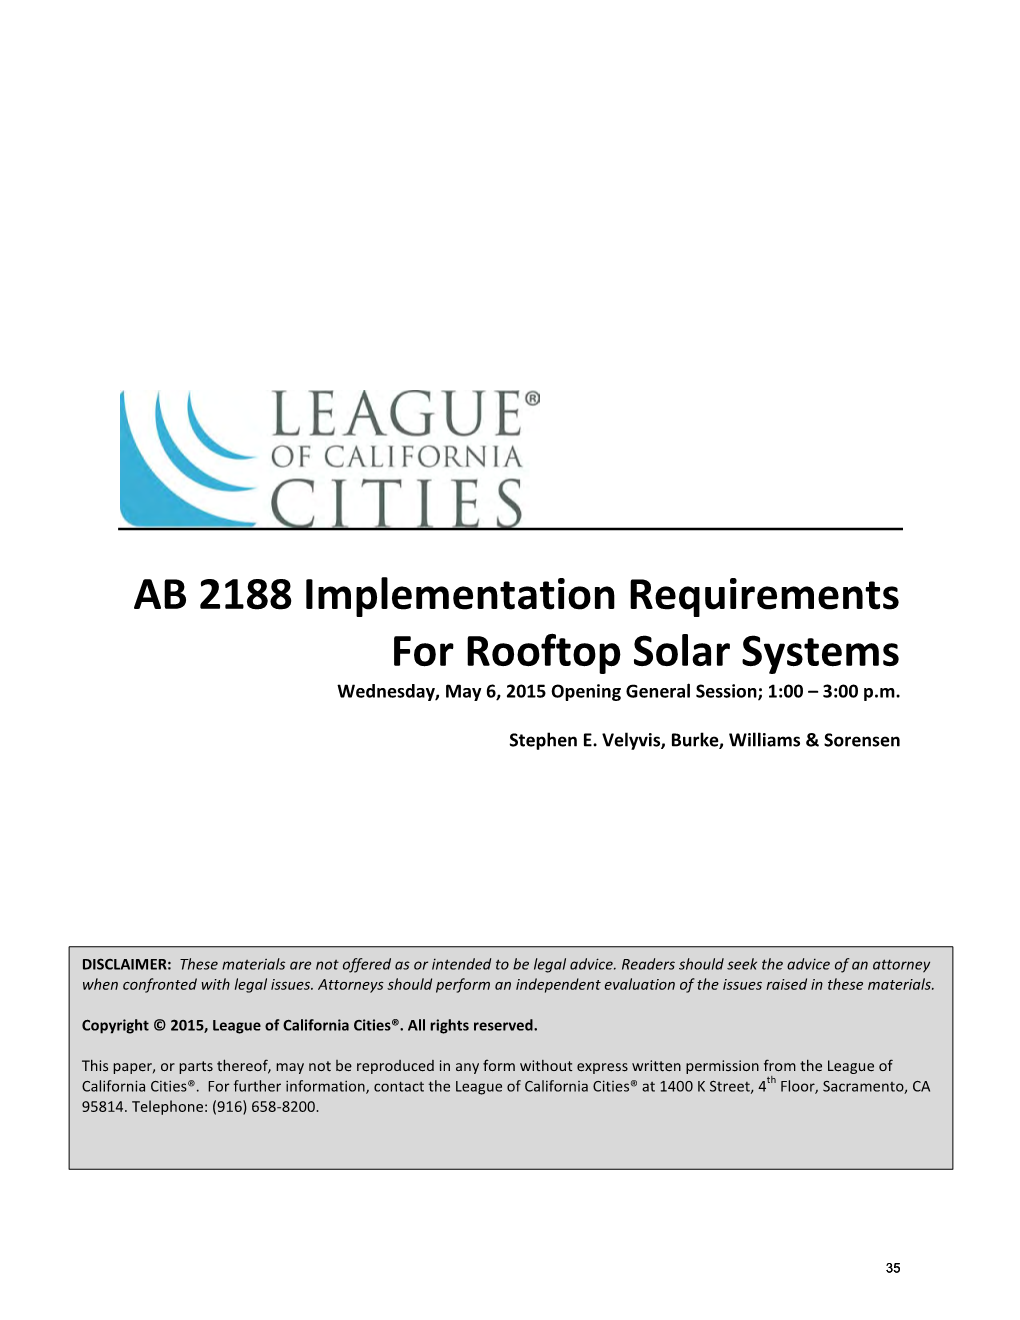 AB 2188 Implementation Requirements for Rooftop Solar Systems Wednesday, May 6, 2015 Opening General Session; 1:00 – 3:00 P.M